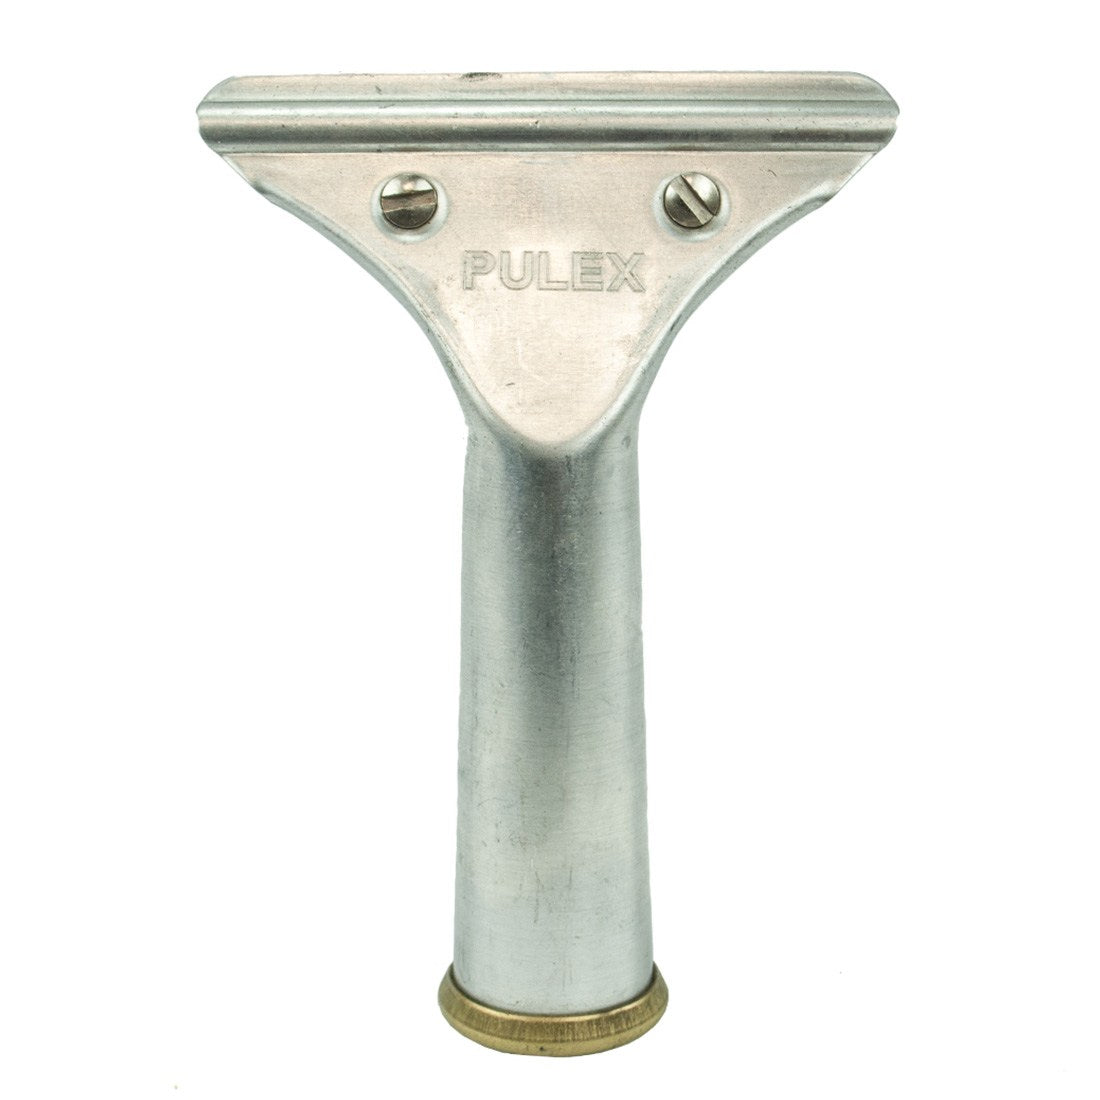 Pulex UltraLite Aluminum Squeegee Handle - Front View